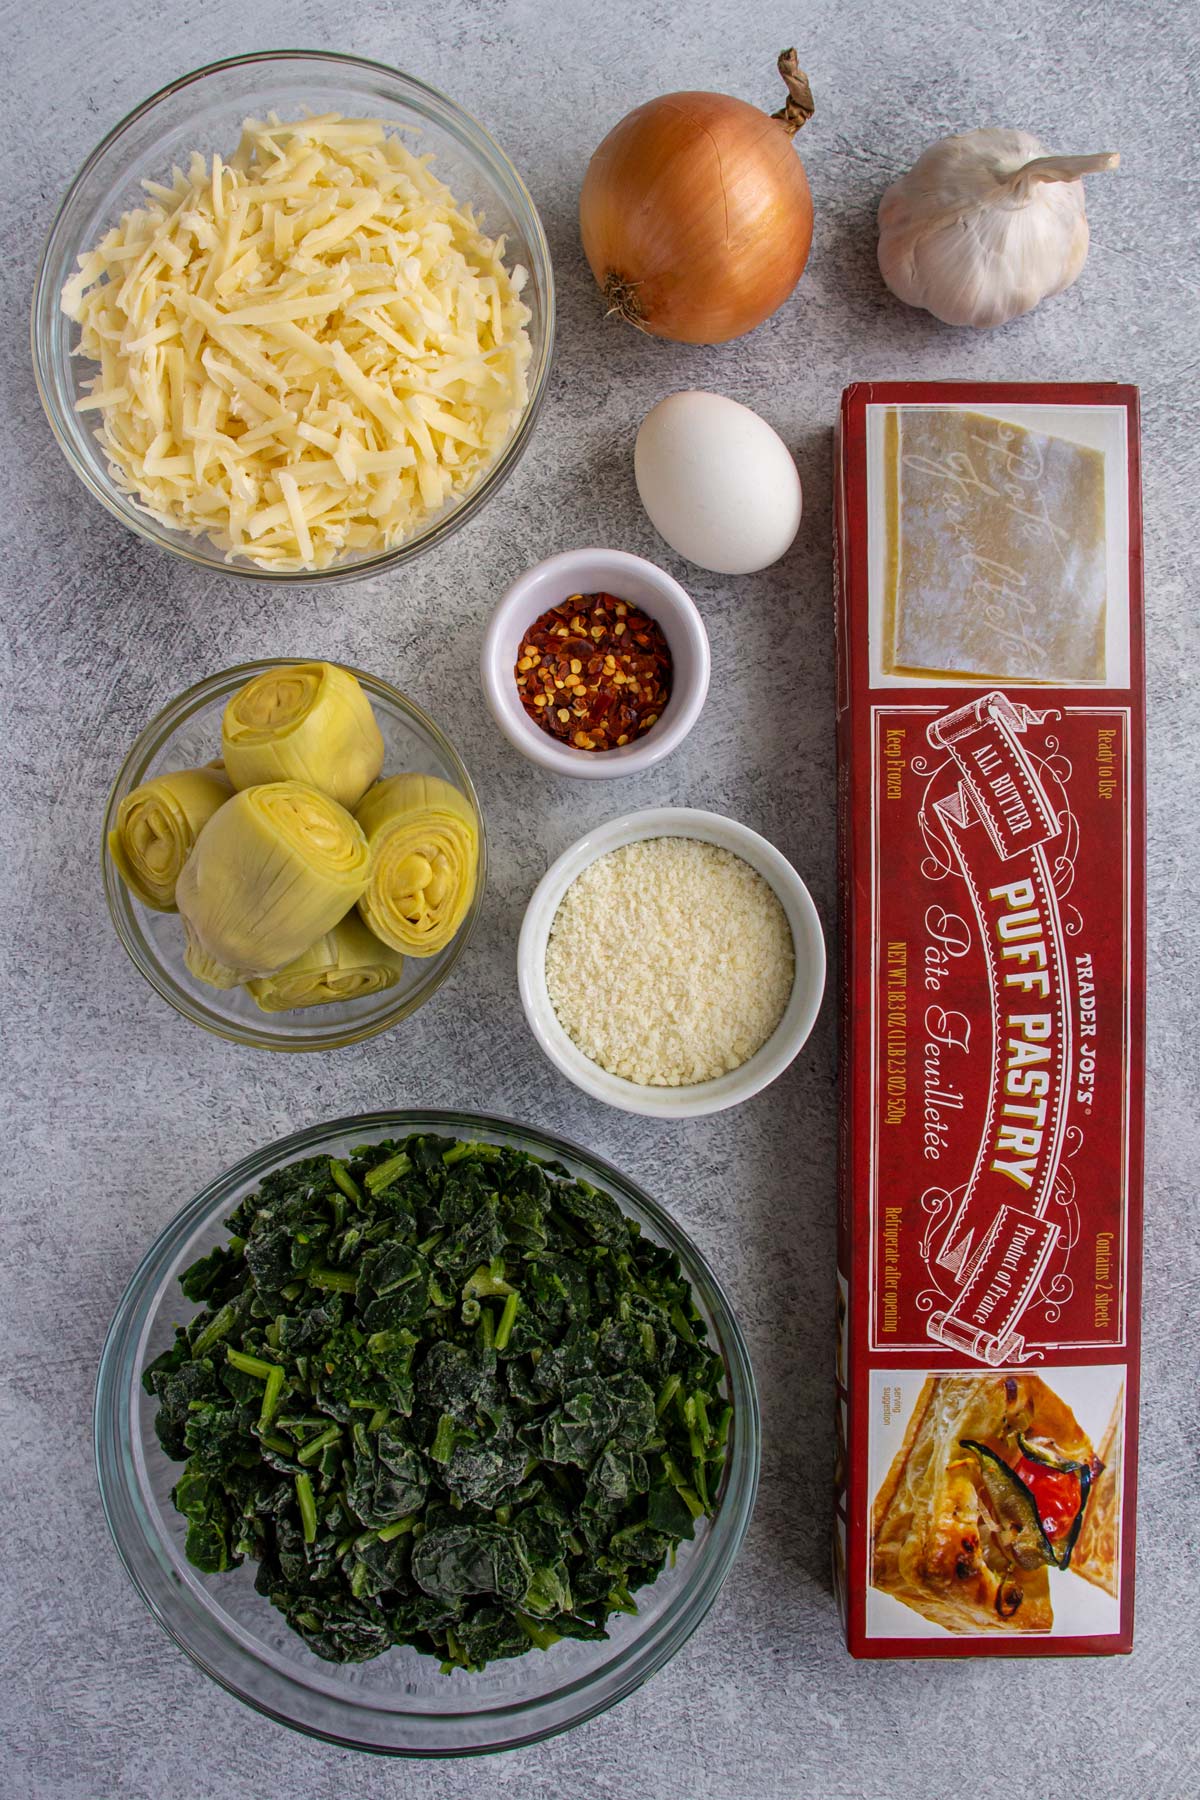 Ingredients for spinach and artichoke puff pastry swirls on a light grey background.